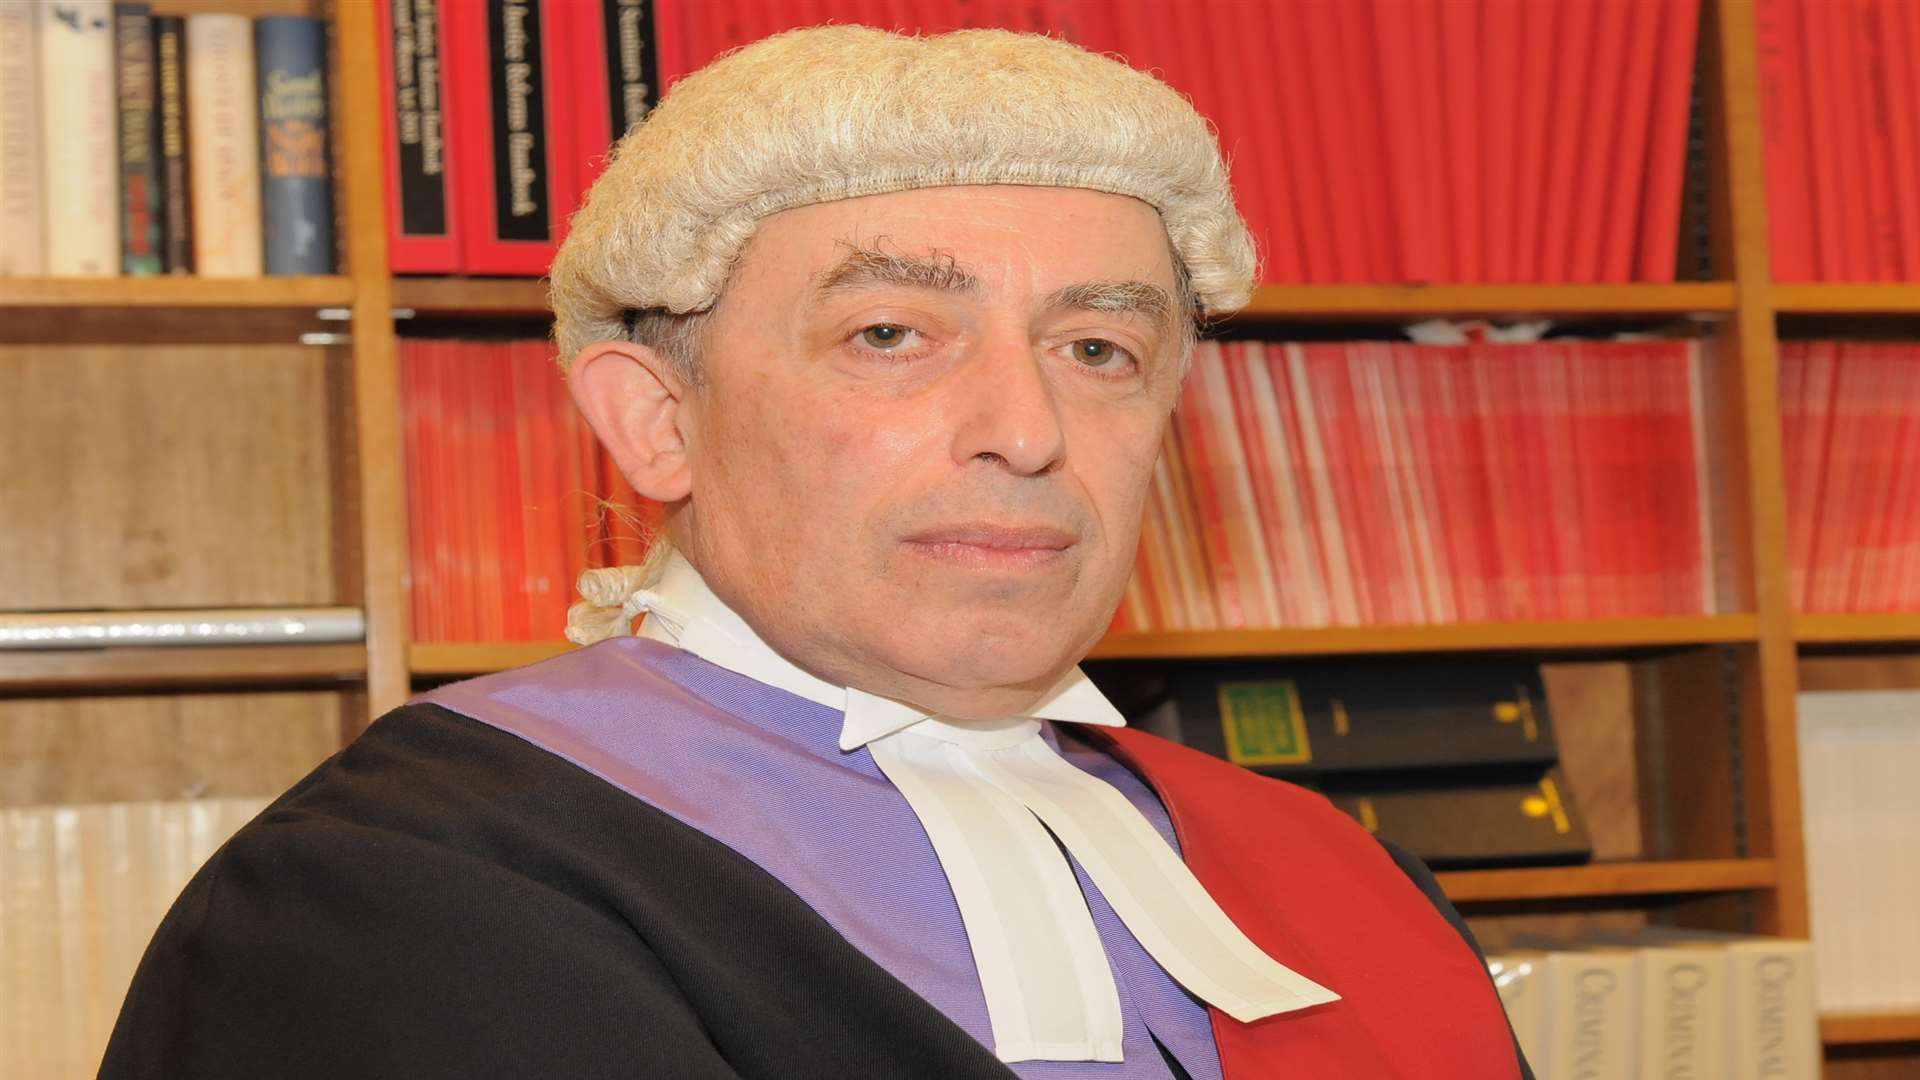 Judge Philip Statman presided over the case